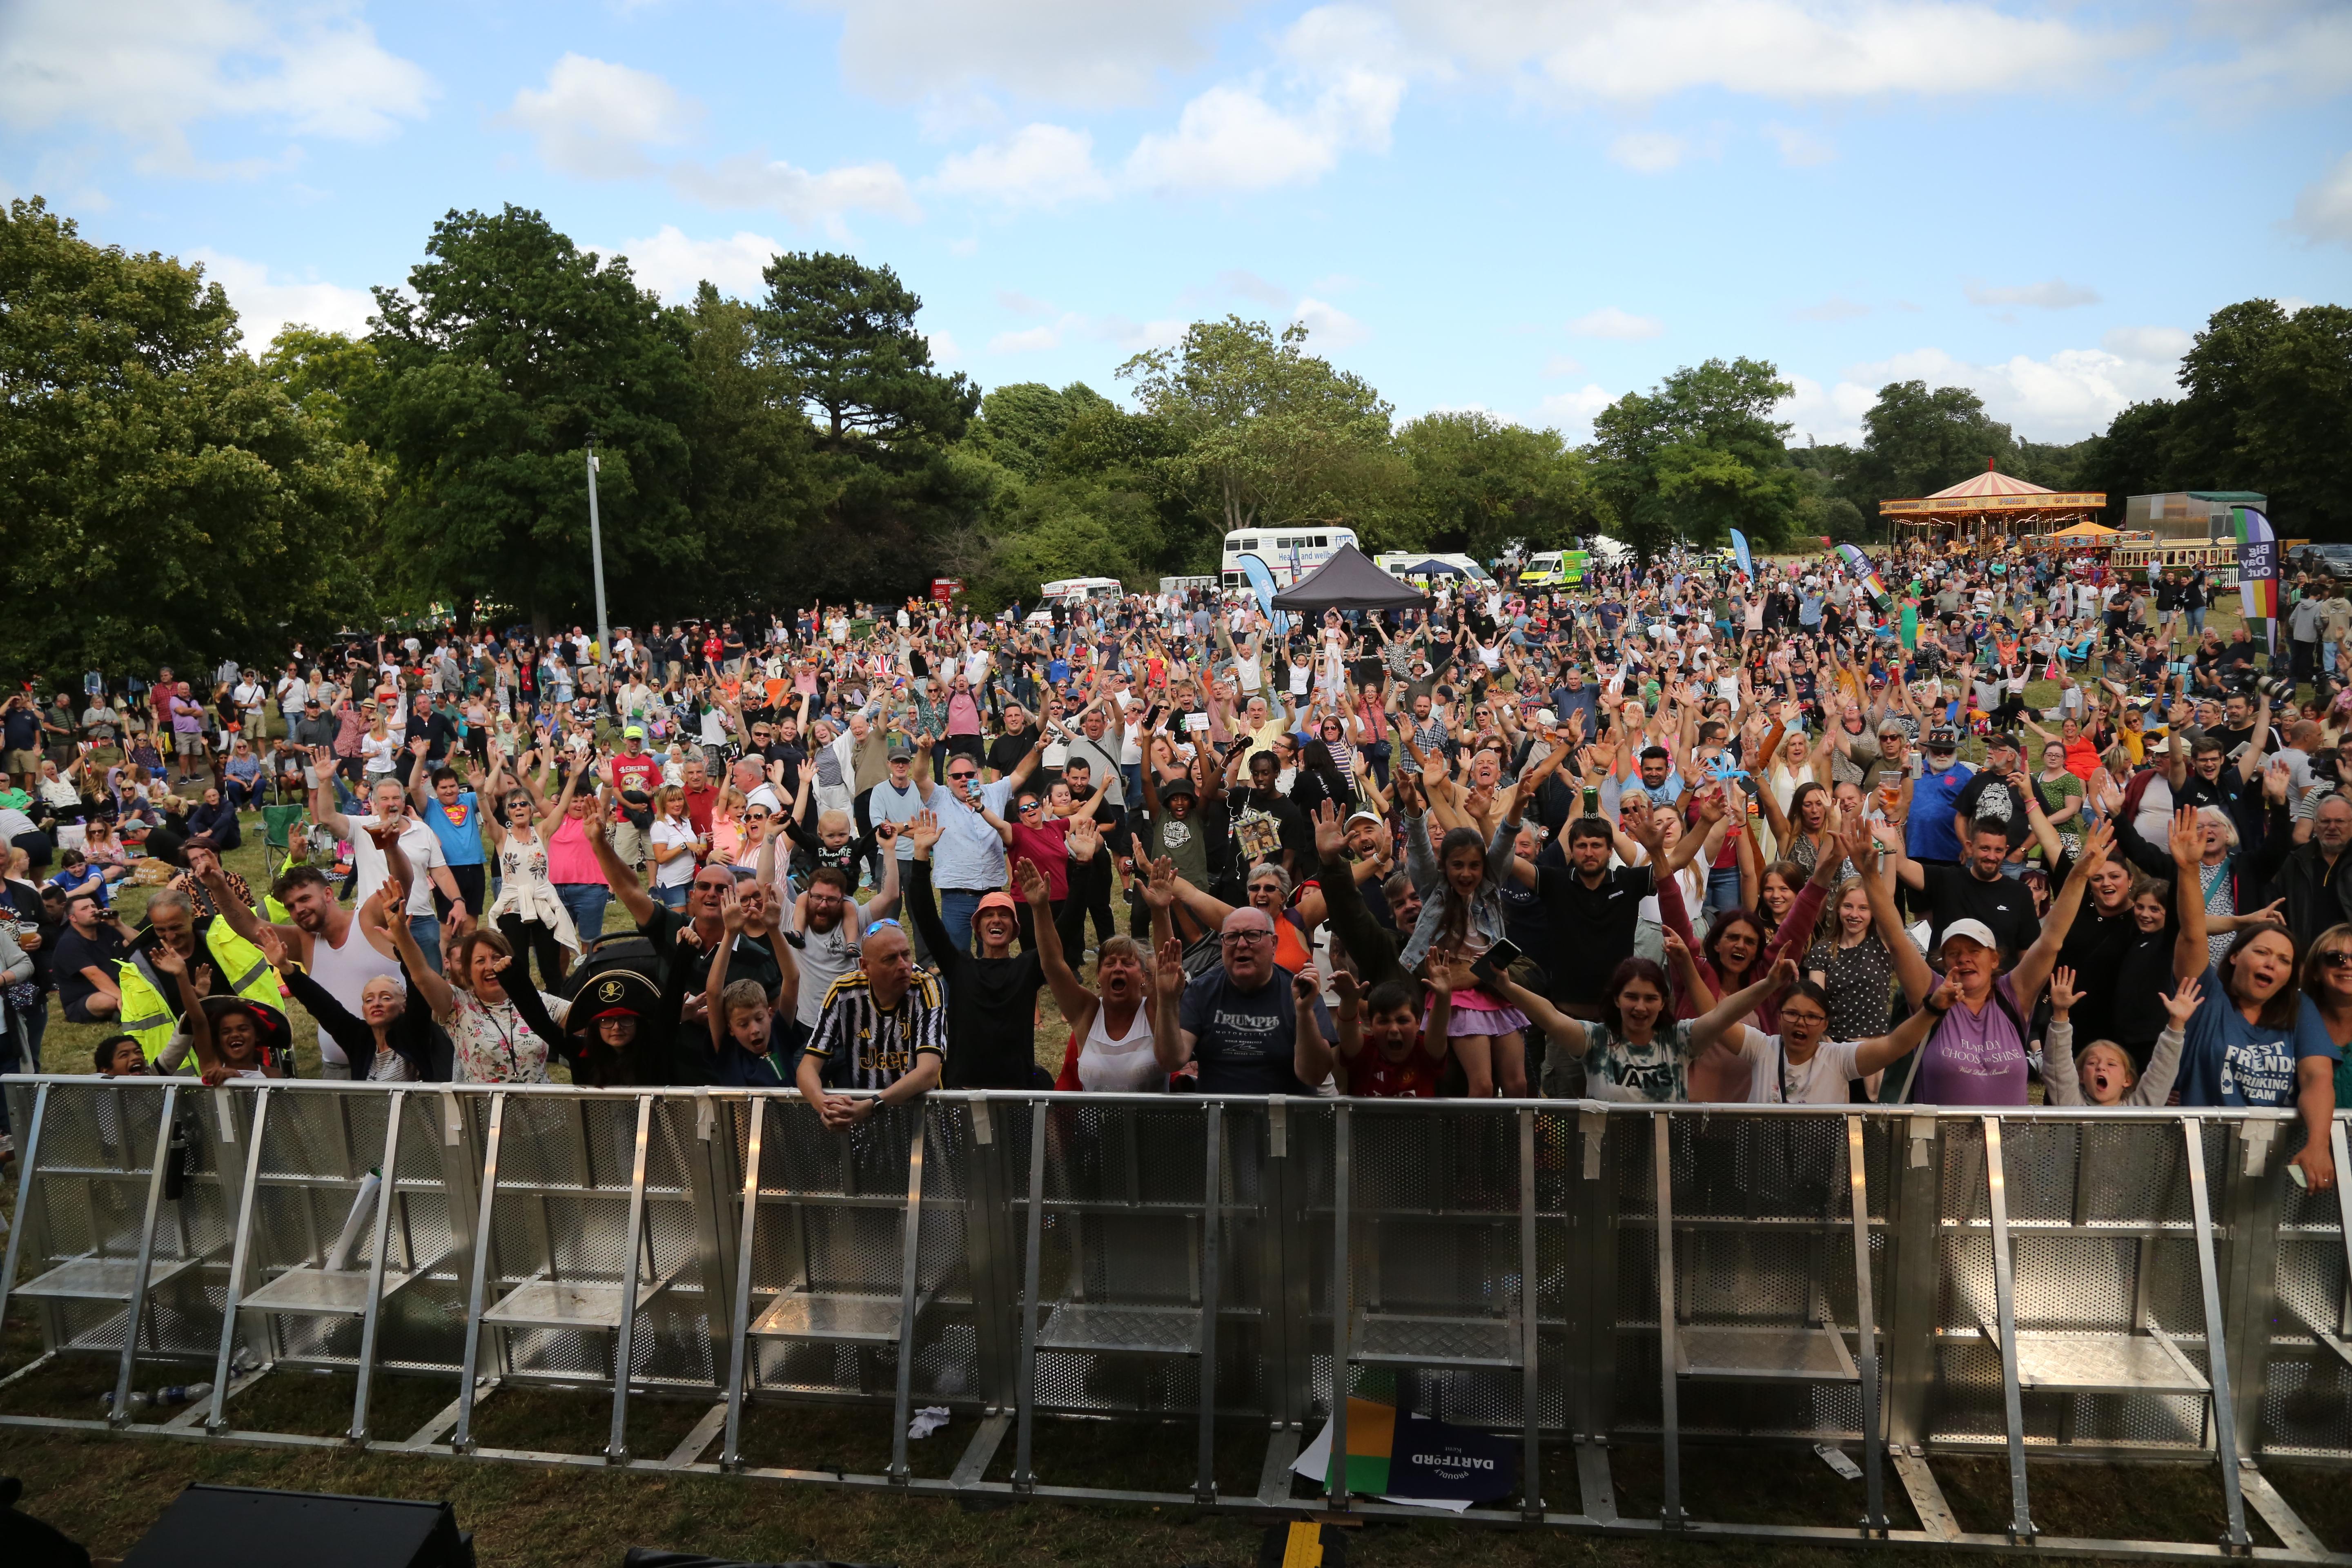 A crowd at Dartford's Big Day Out